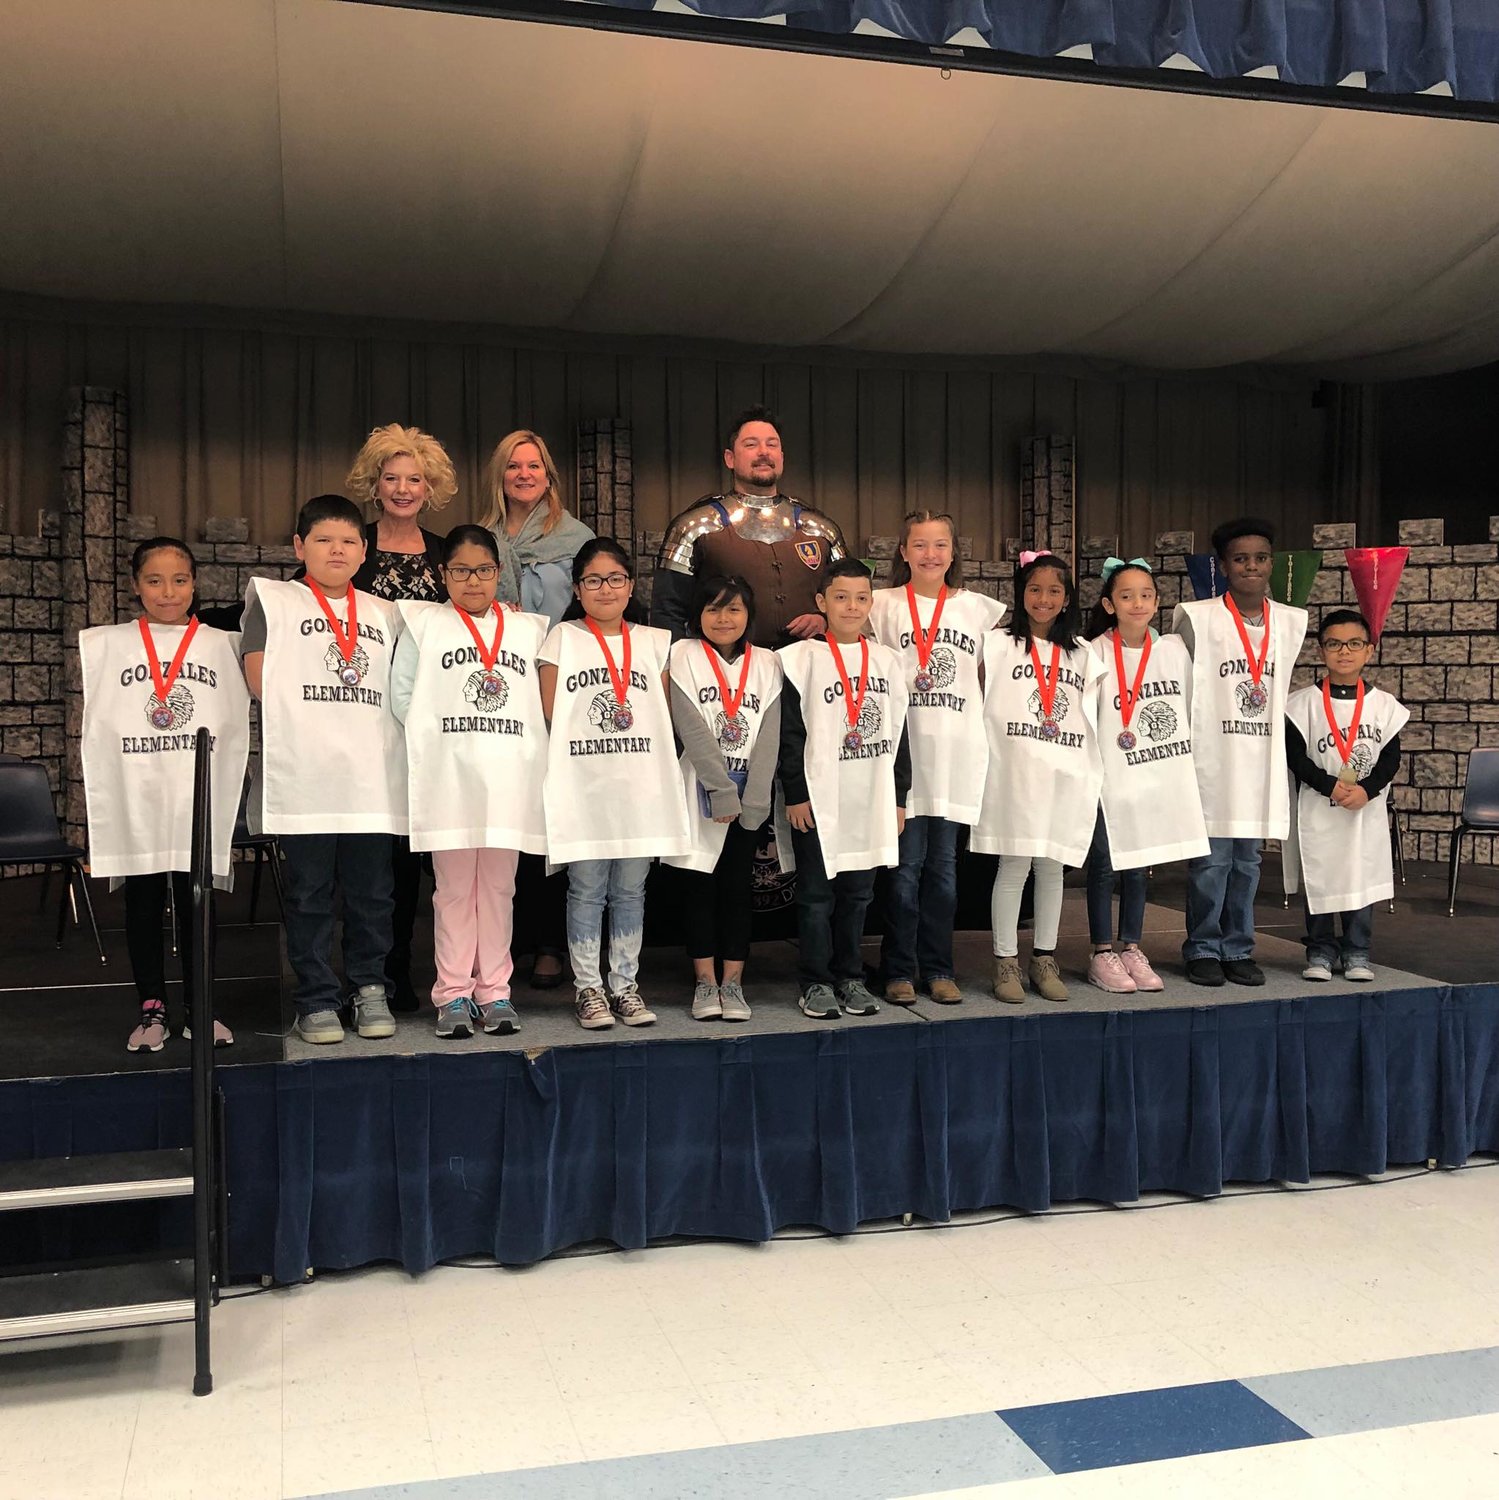 The Rotary Club of Gonzales’ Early Act First Knight program is an exciting program that promotes chivalry and other core values to elementary school aged students. Now in its fourth year, Rotarians are asking the community for support of its program.